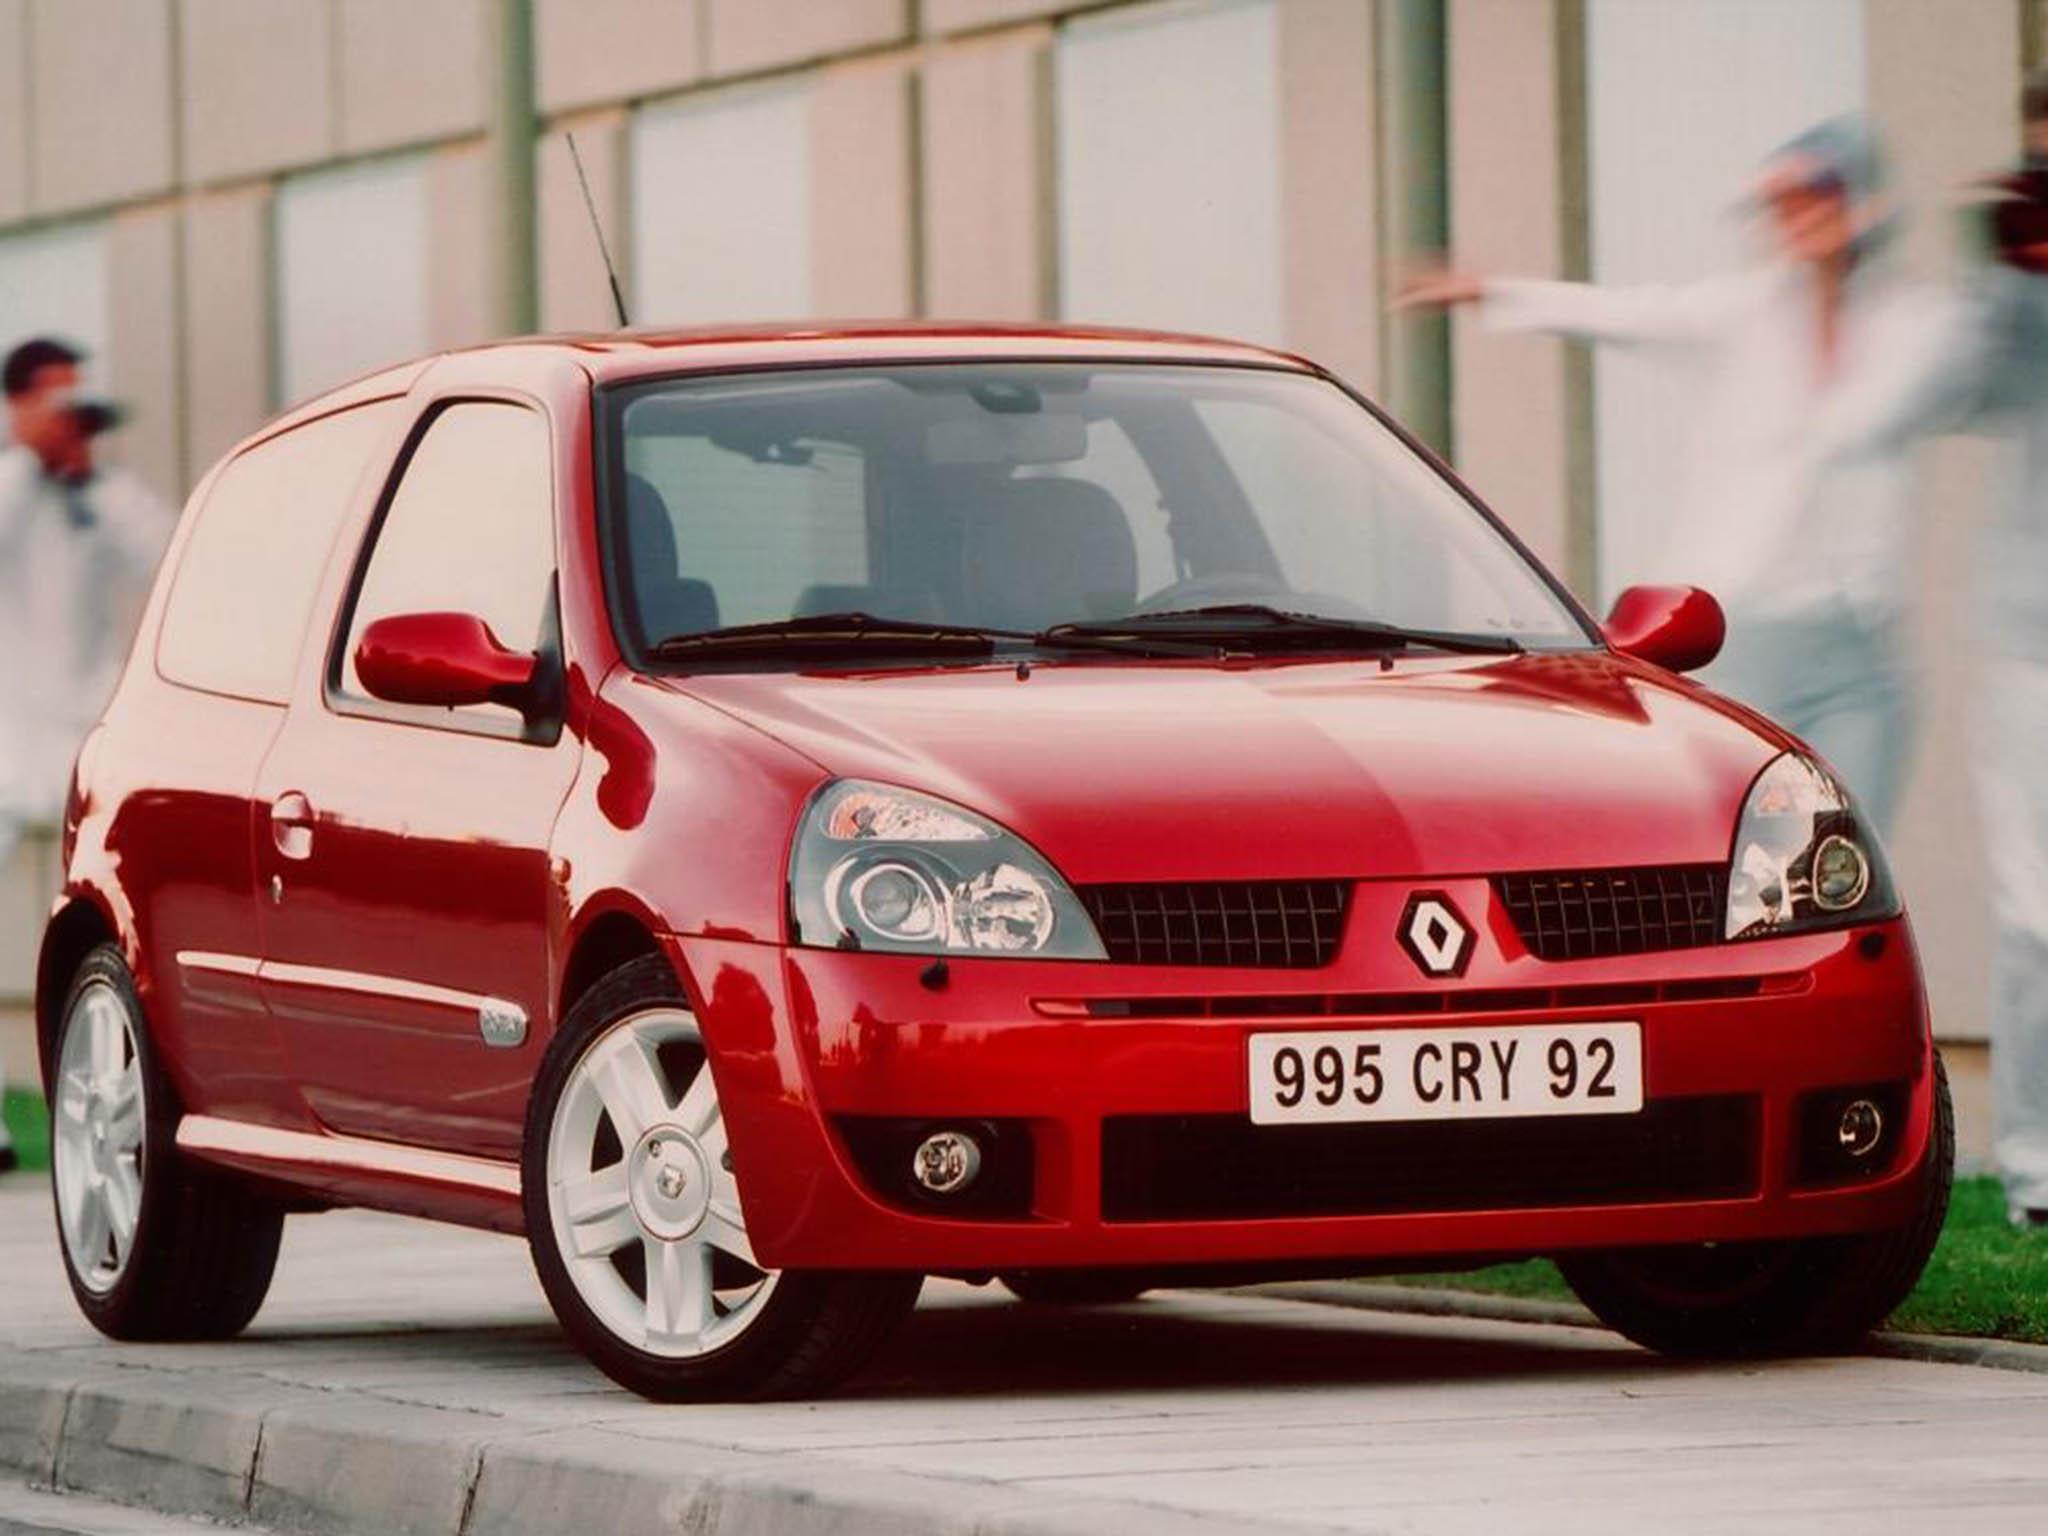 The Renault Clio scored four stars out of five for the the overall Euro NCAP safety rating